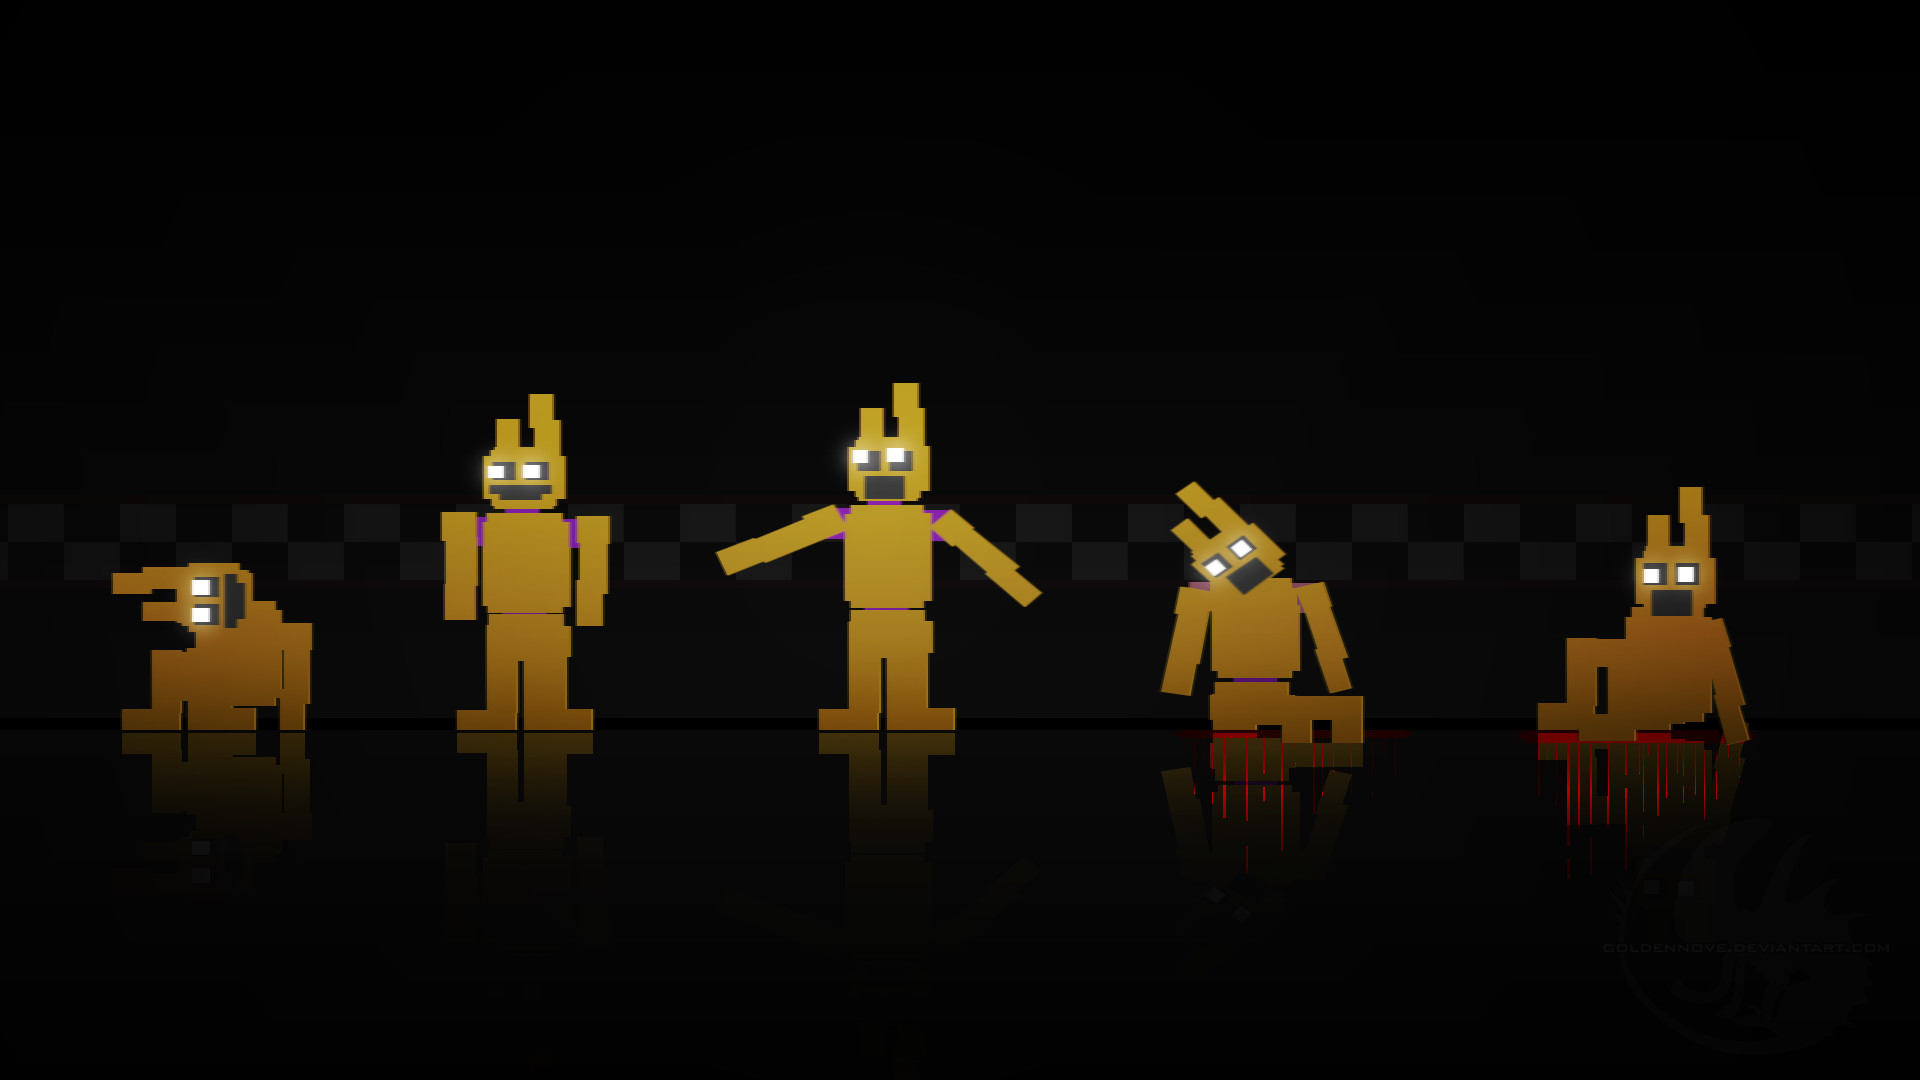 Five Nights at Freddys 3 – wallpaper by GoldenNove